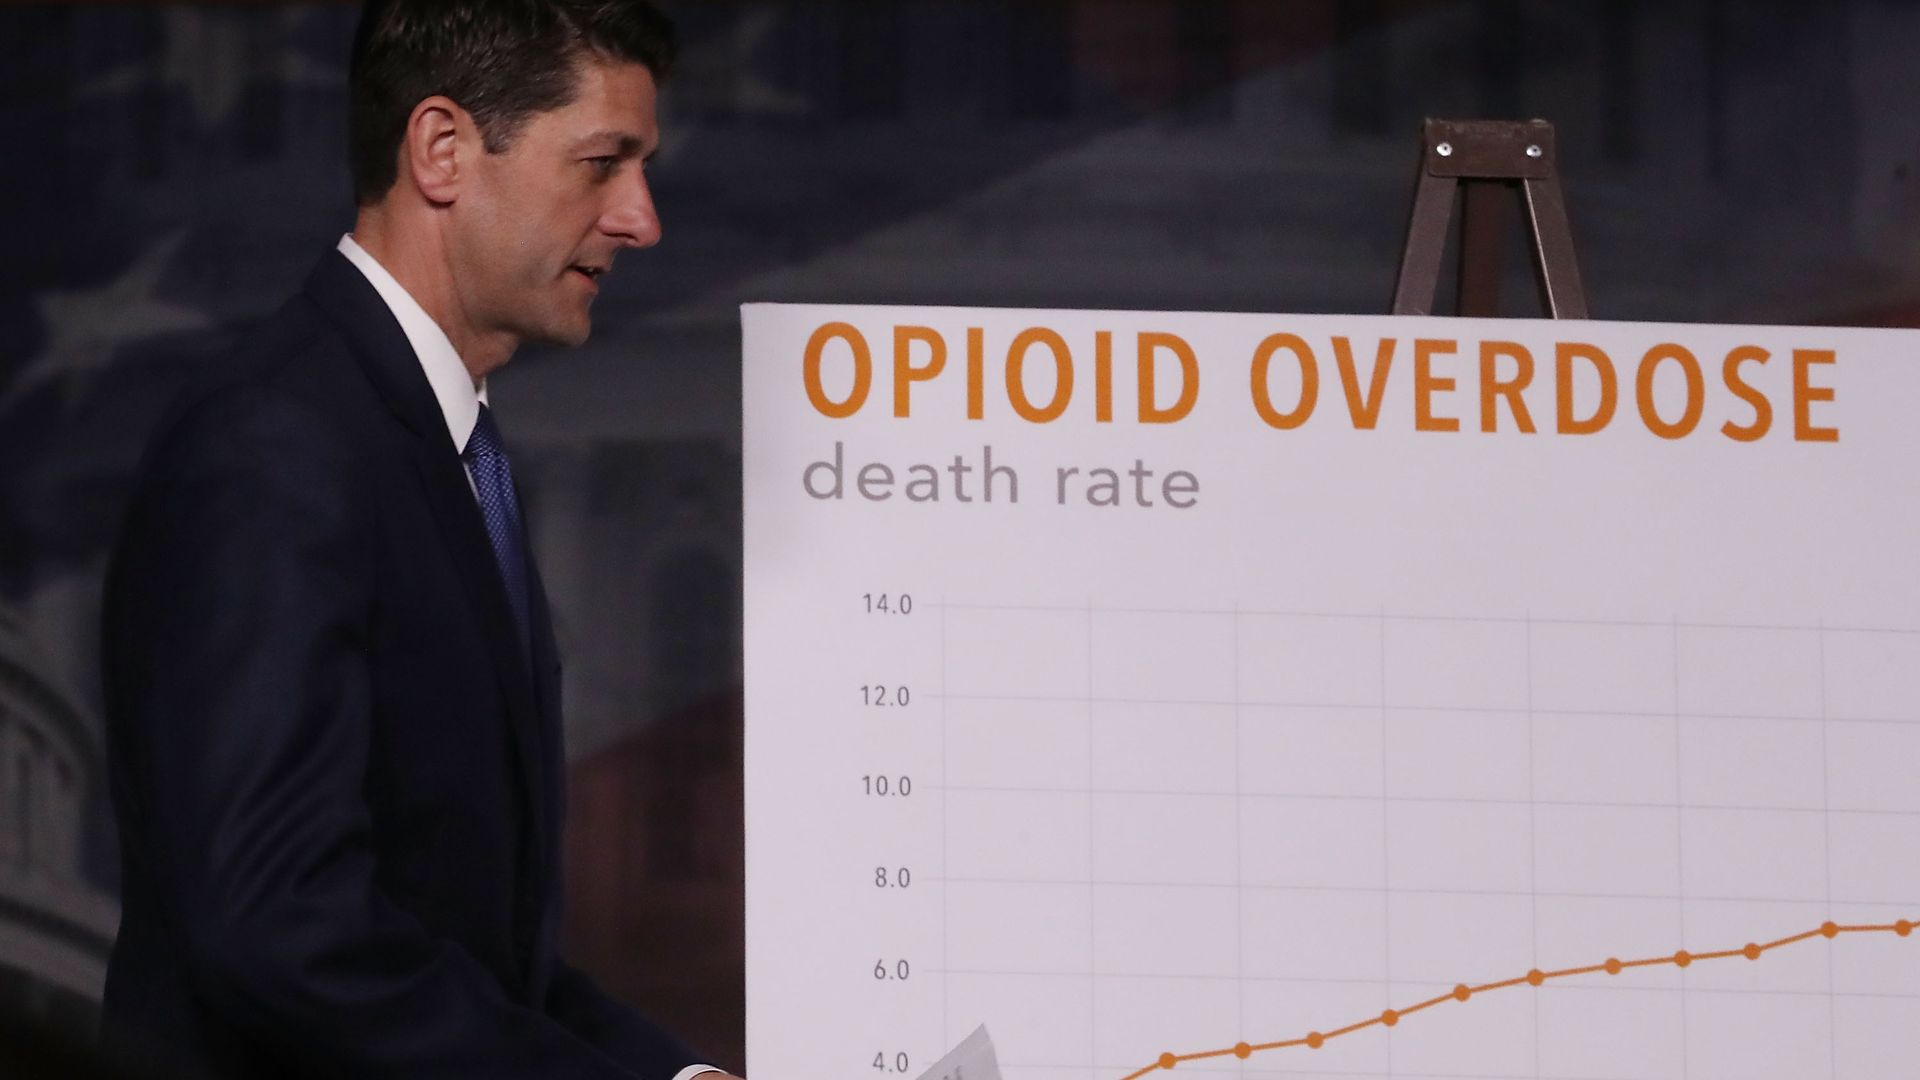 Paul Ryan stands next to a graph depicting an increase in drug overdose deaths.